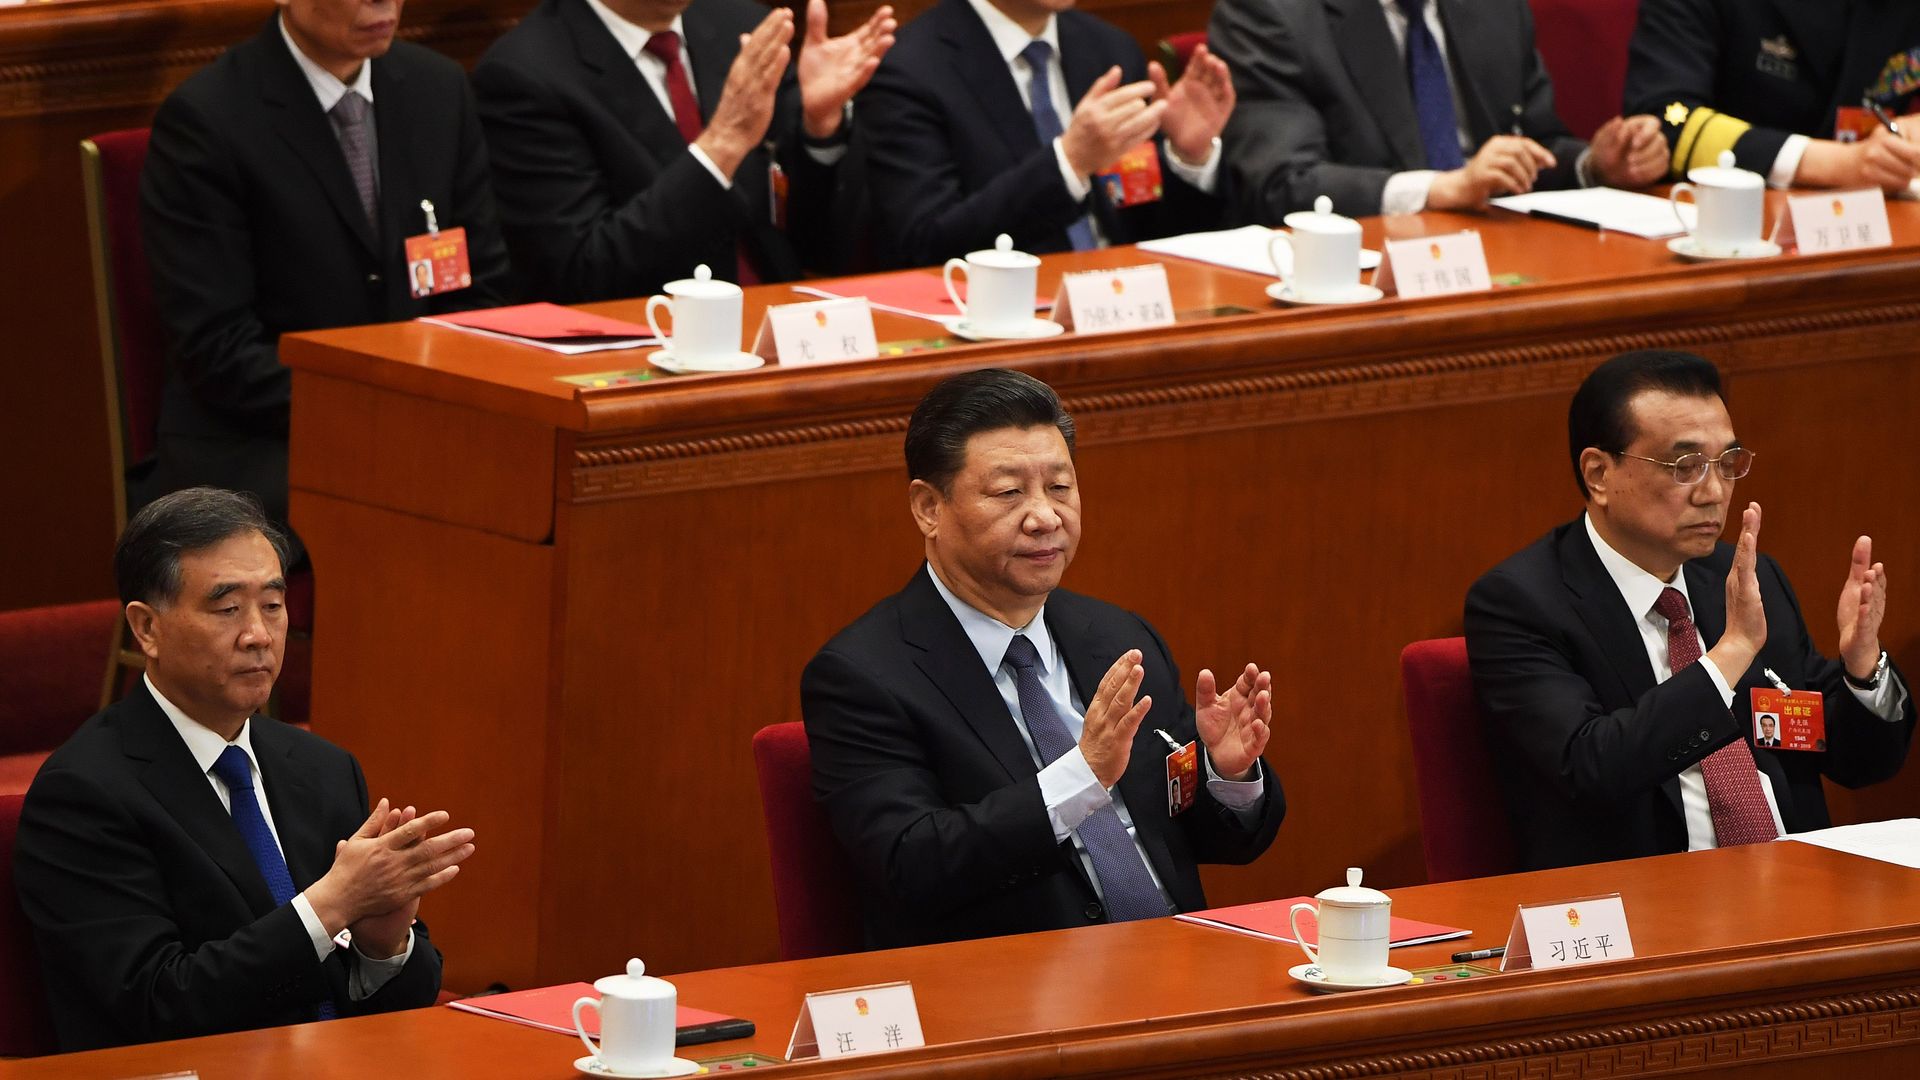 The closing session of the National People's Congress (NPC) in Beijing's Great Hall of the People.